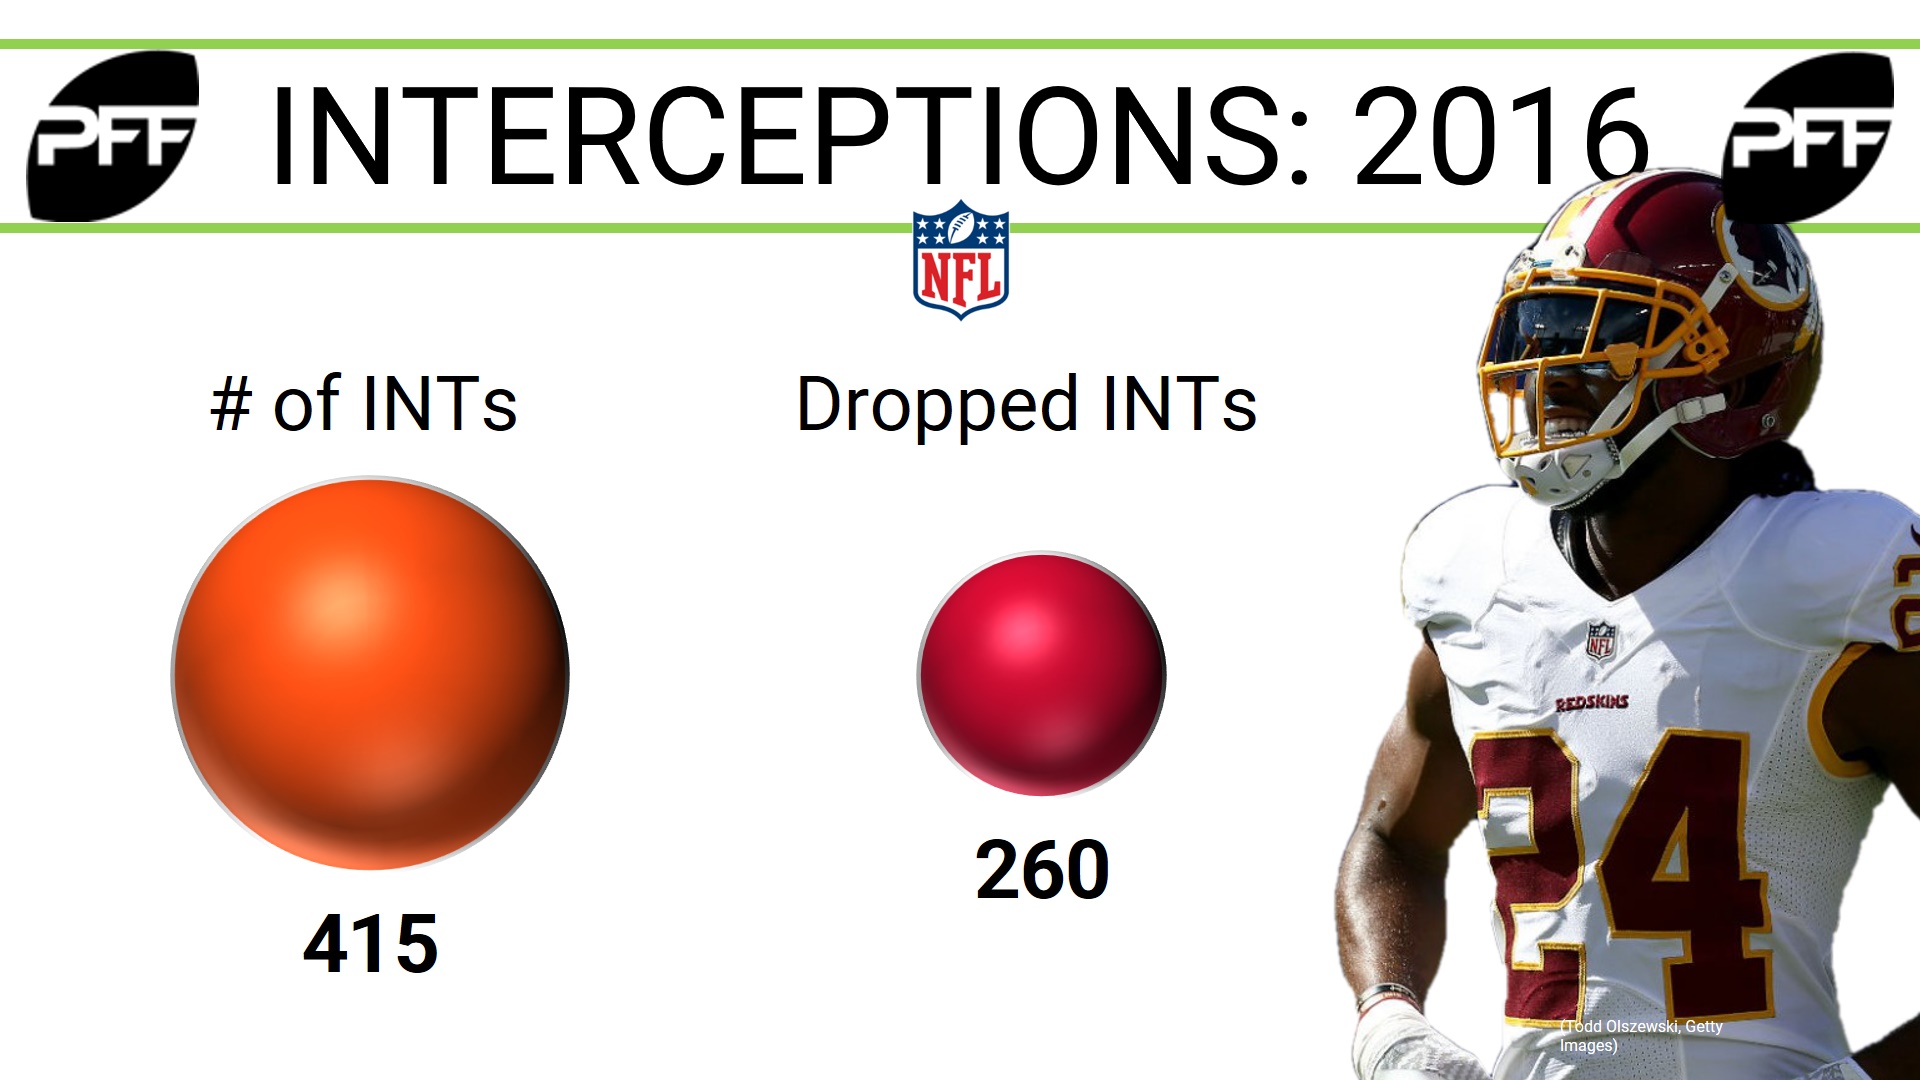 Just how prevalent are dropped interceptions in today's NFL? NFL News